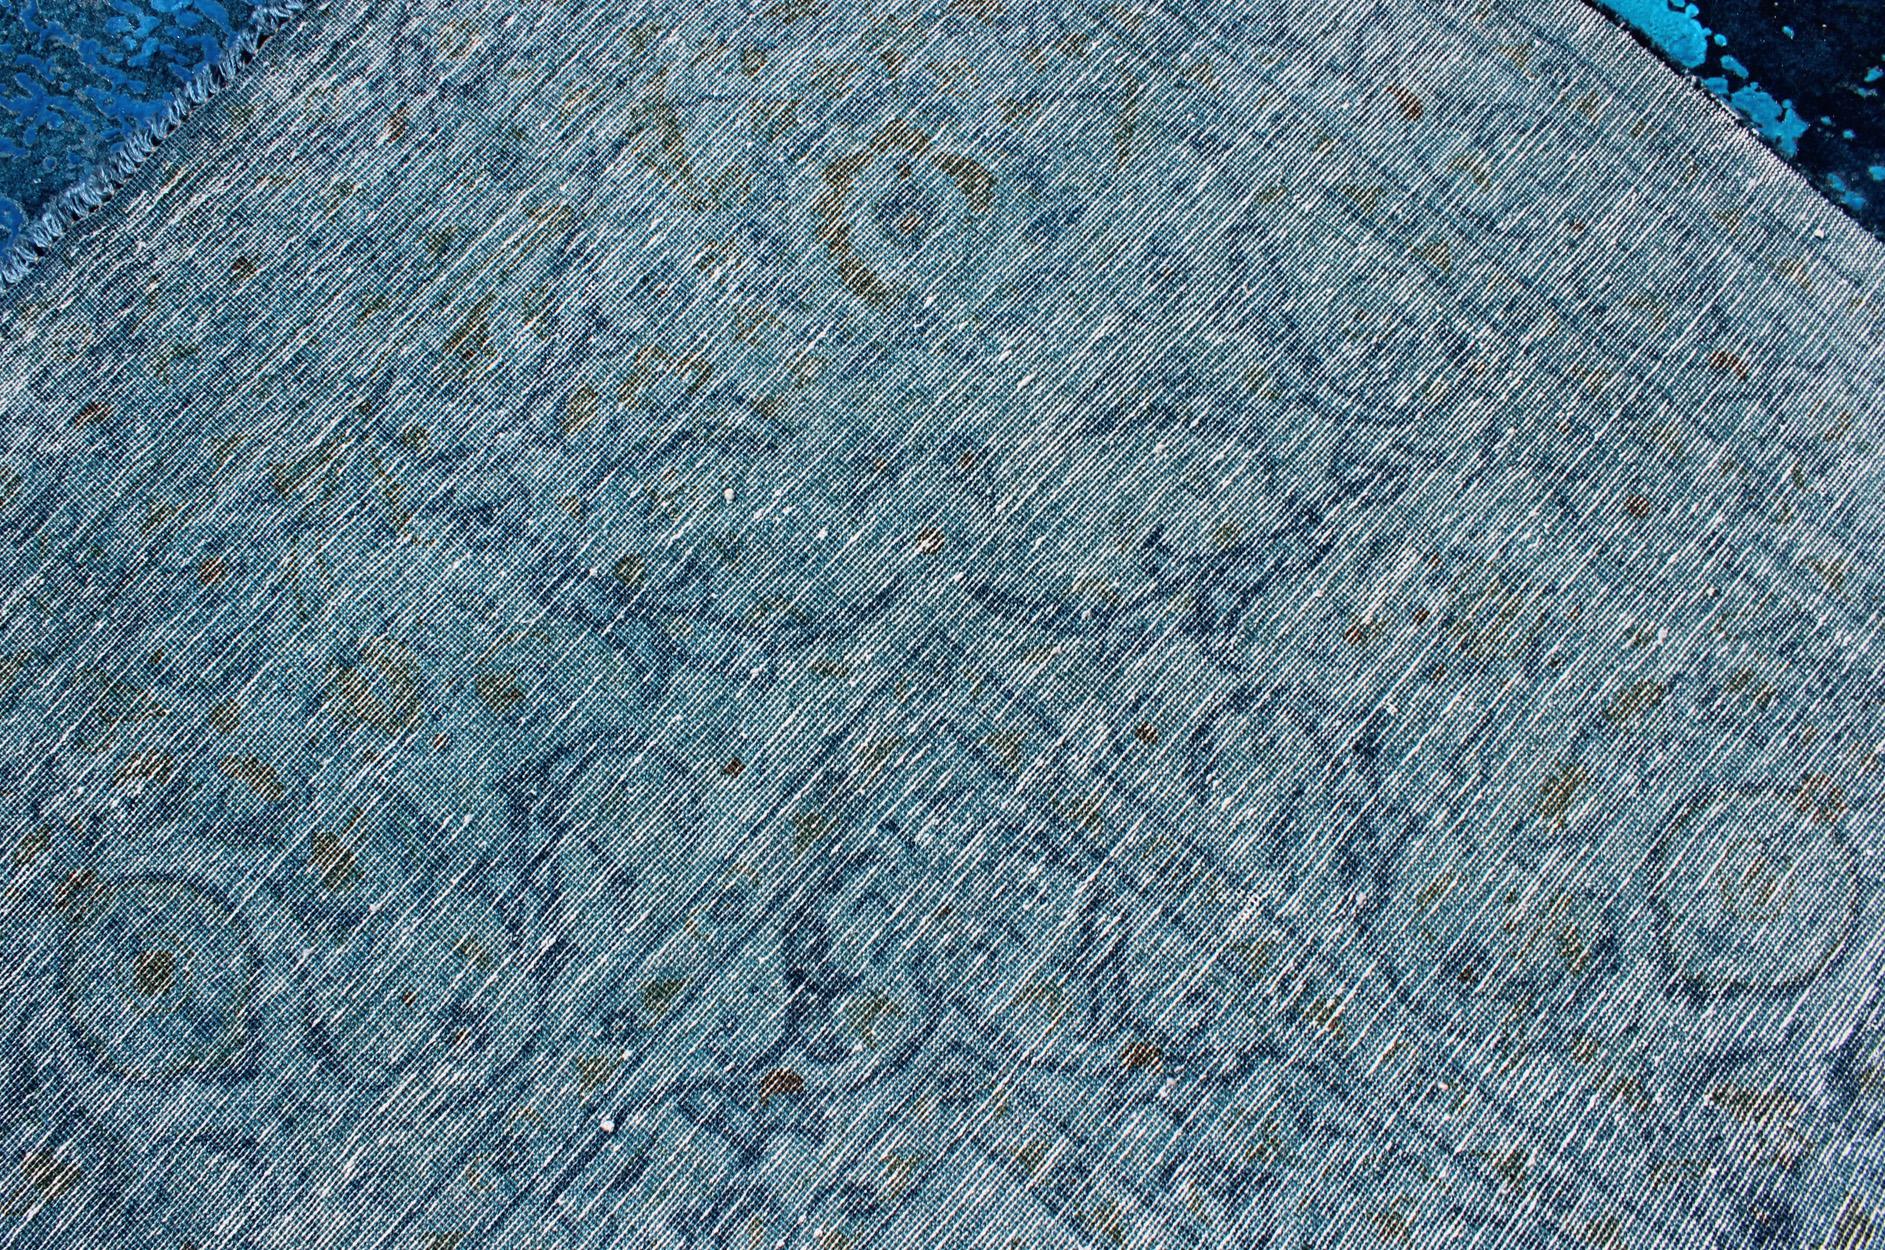 Vintage Persian Rug with Modern Overdyed Design in Shades of Blue, Green, Teal 5